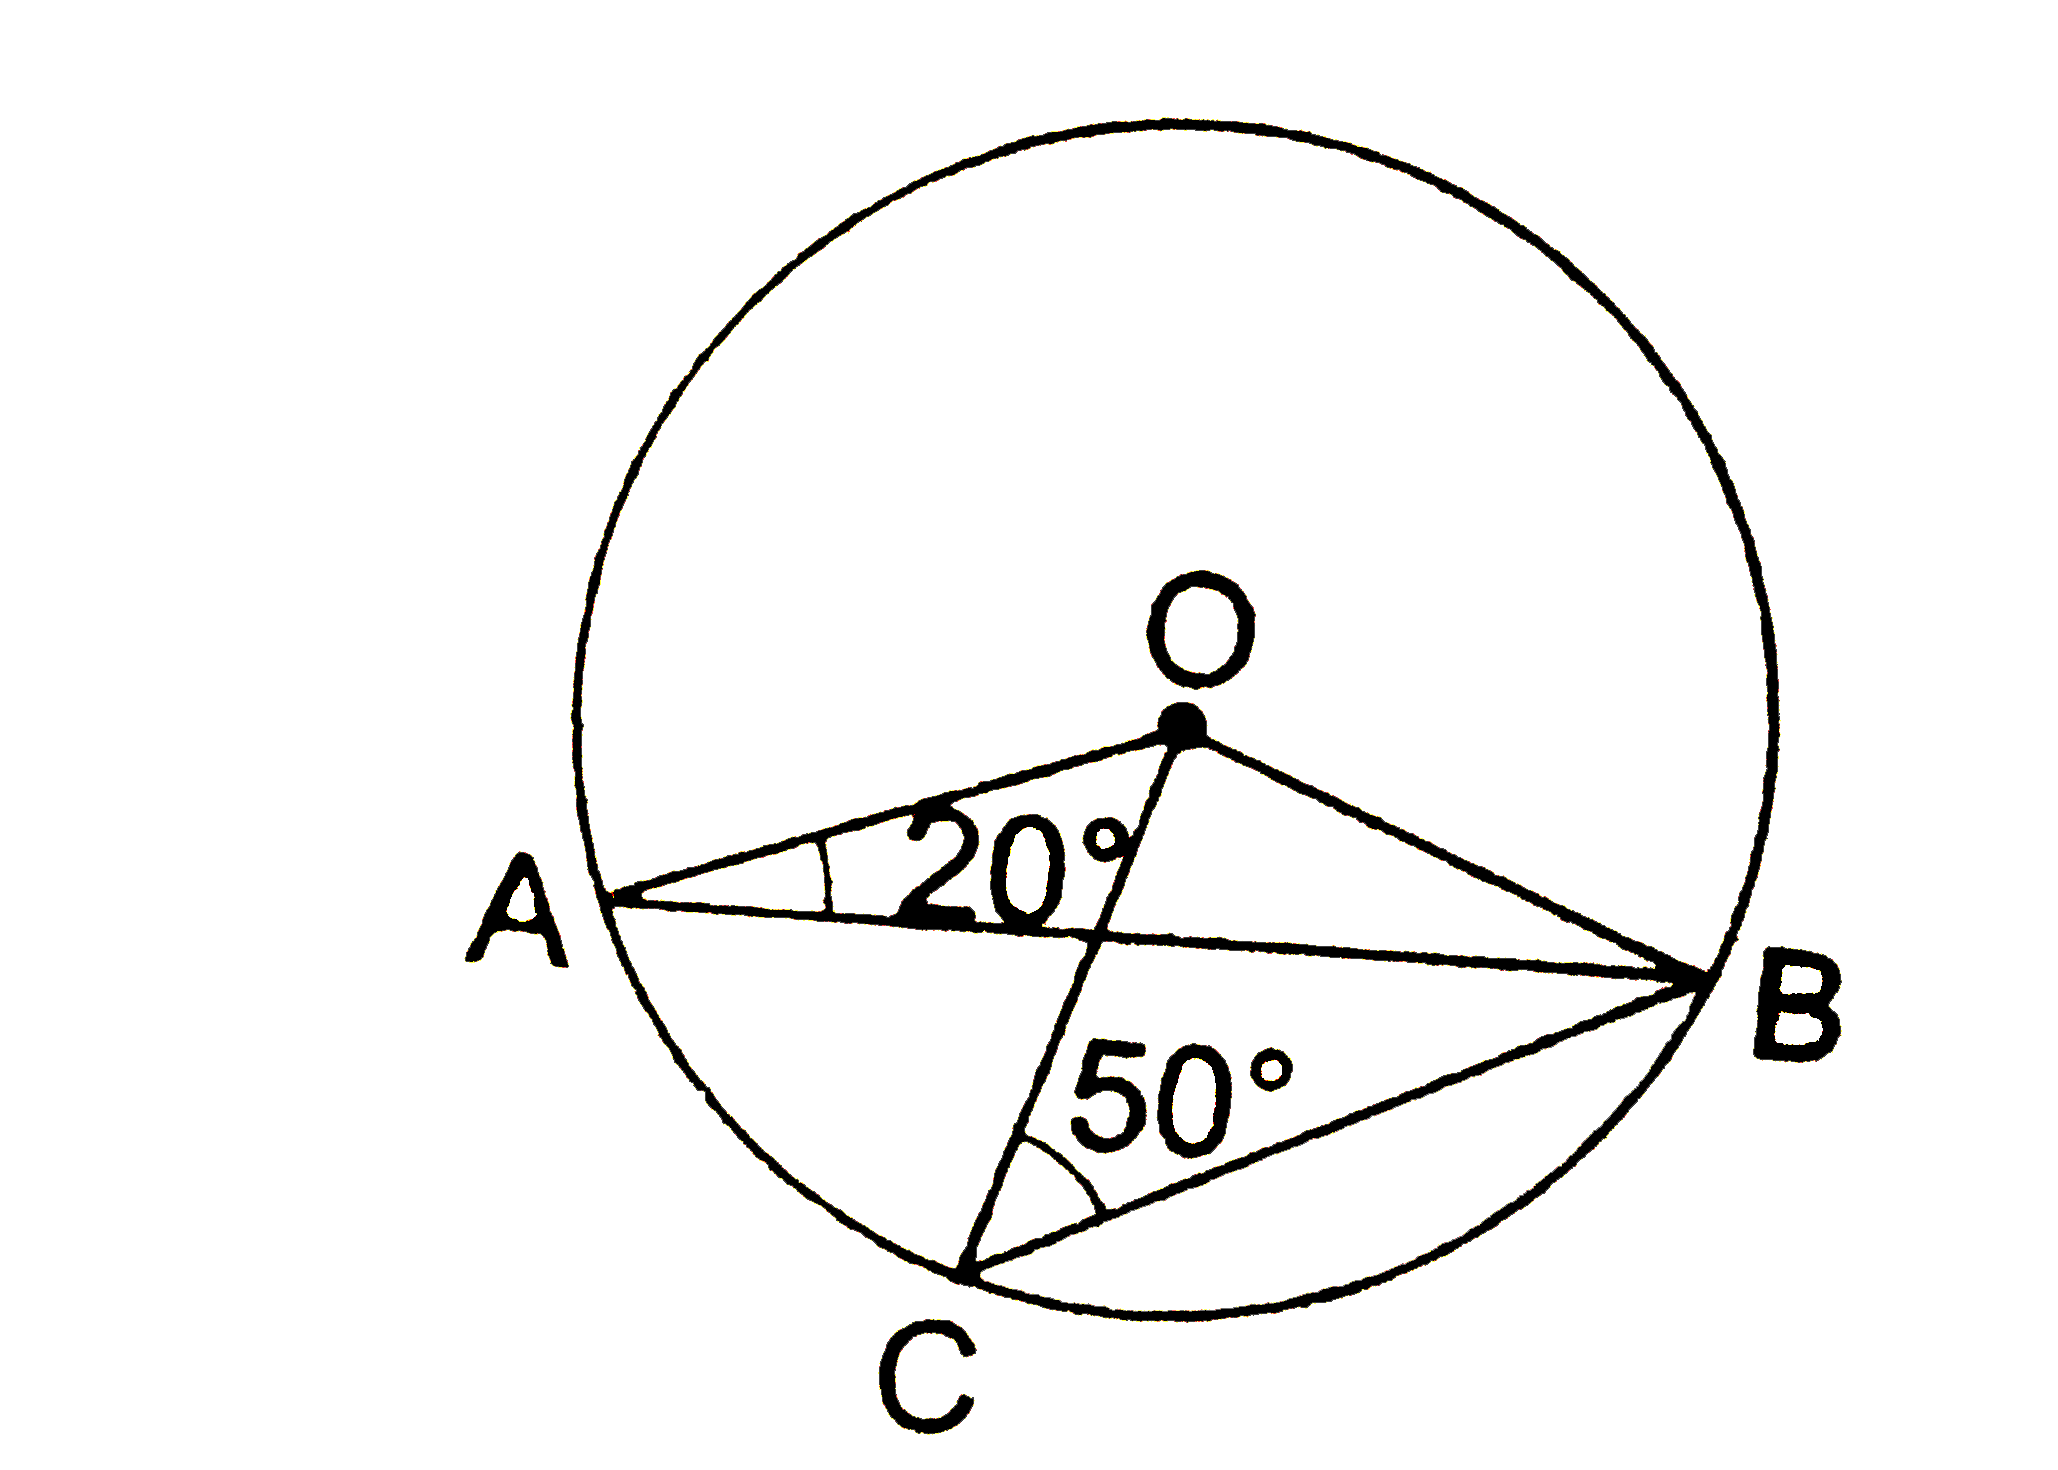 In the given figure, O is the centre of a circle in which / OAB = 20^(@) and / OCB = 50^(@) . Then . /AOC = ?